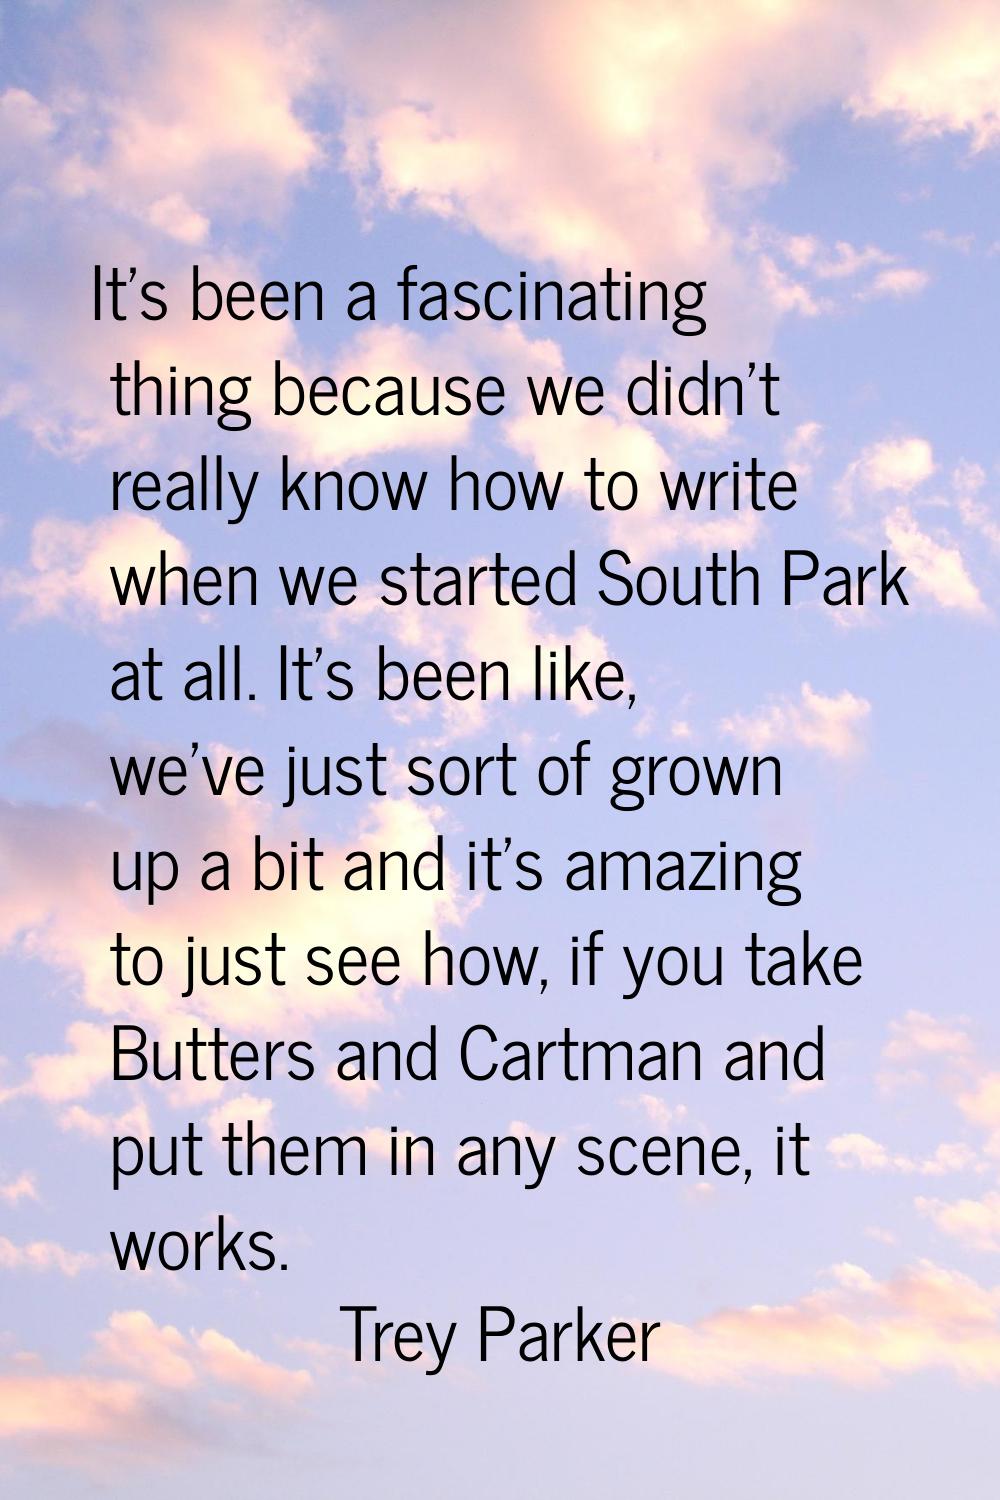 It's been a fascinating thing because we didn't really know how to write when we started South Park